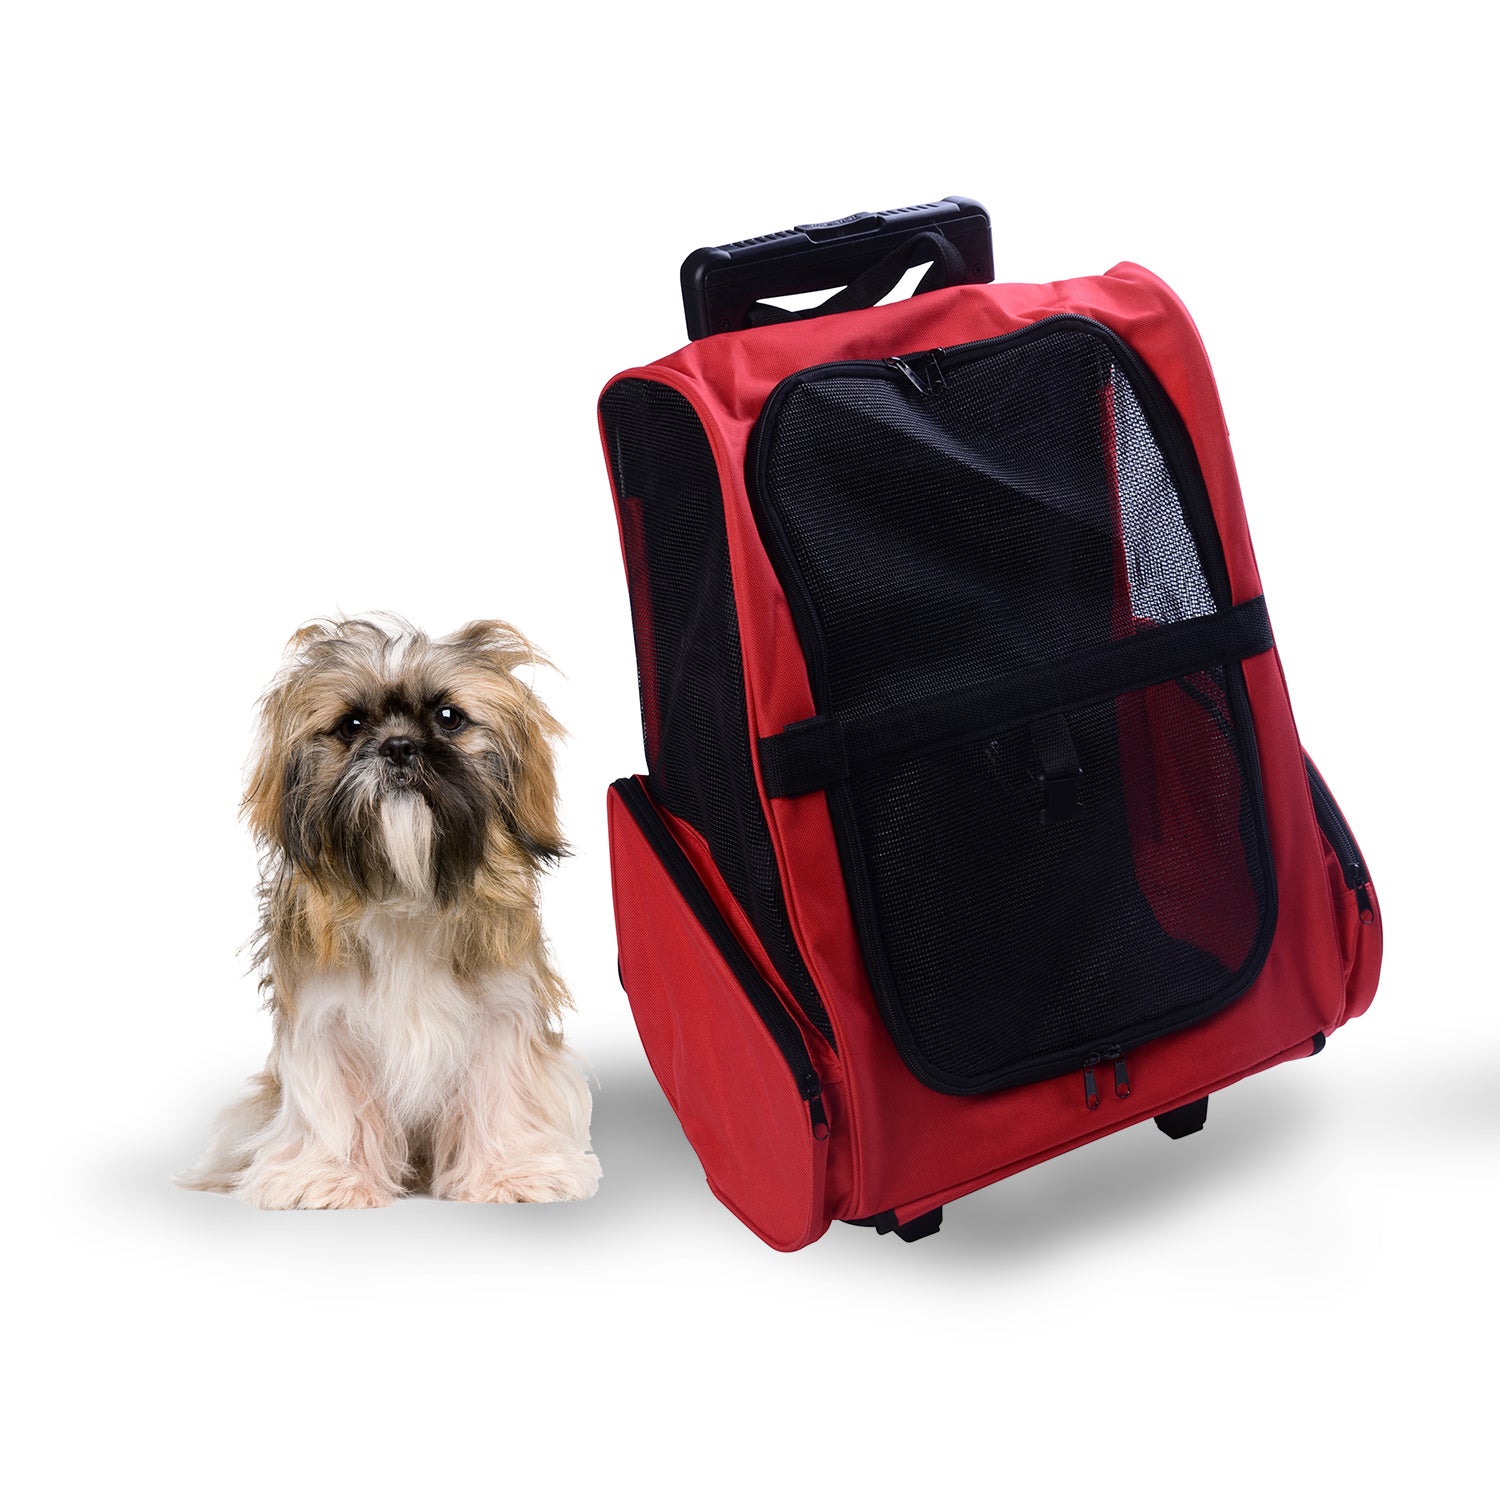 Travel Red Backpack Trolley, Steel Wire Frame